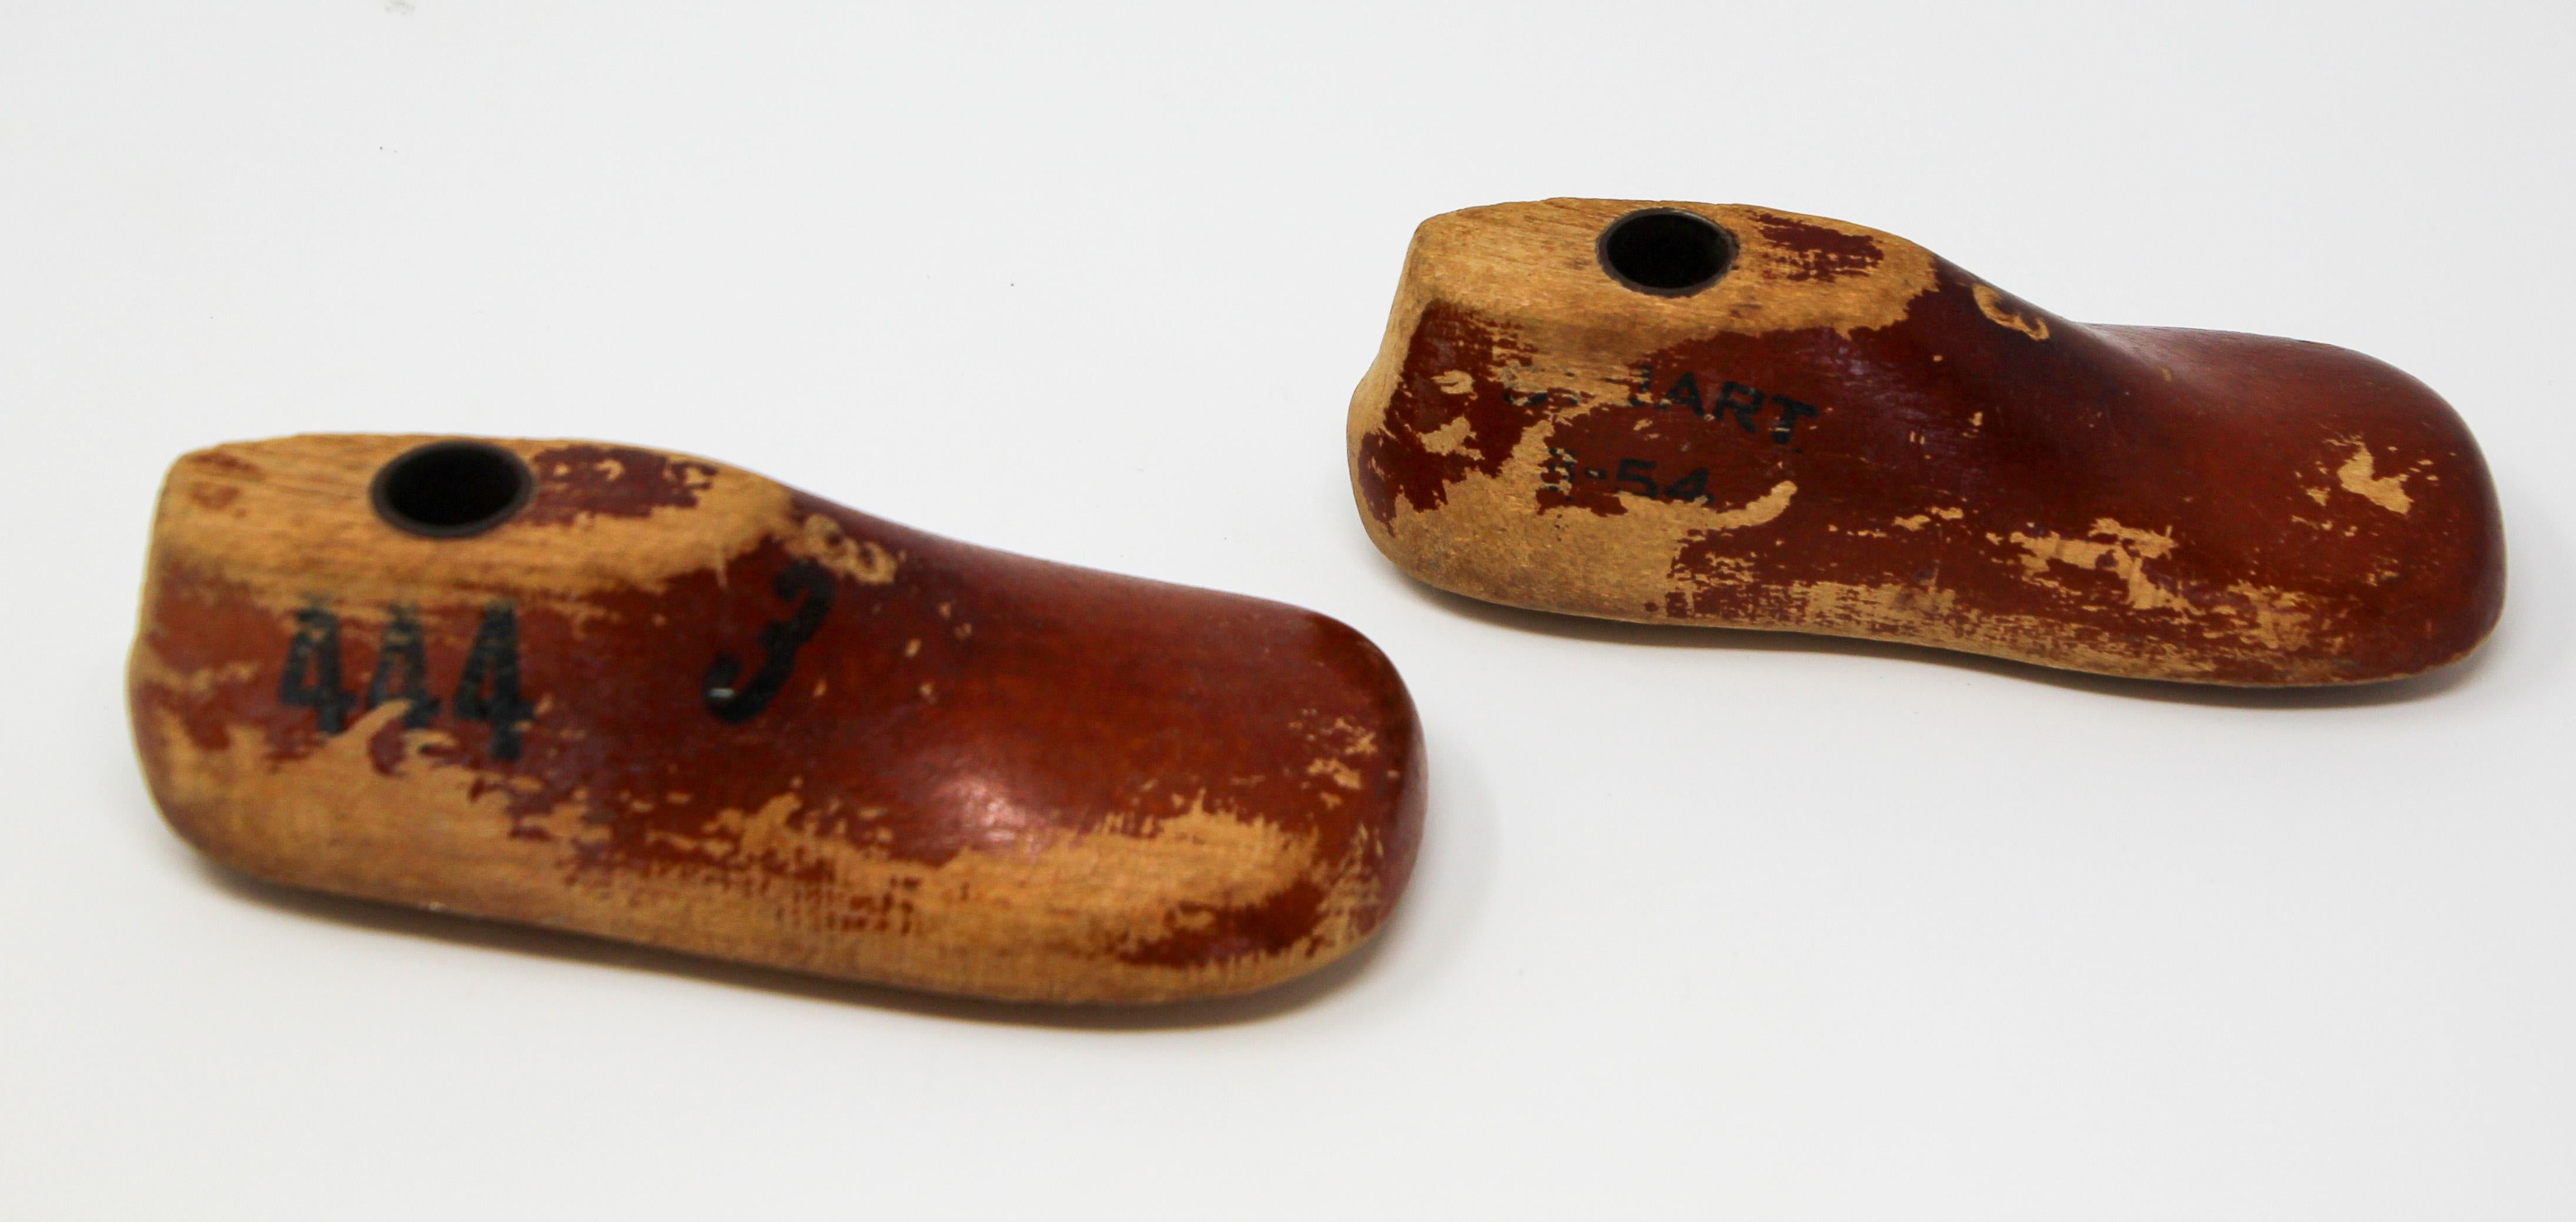 Vintage American handcrafted wood baby shoe maker form molds model.
Vintage handcrafted wooden shoe making molds from the 1950s.
This well carved solid wood shoe molds would have been used to make handmade shoes.
These molds were traditional made